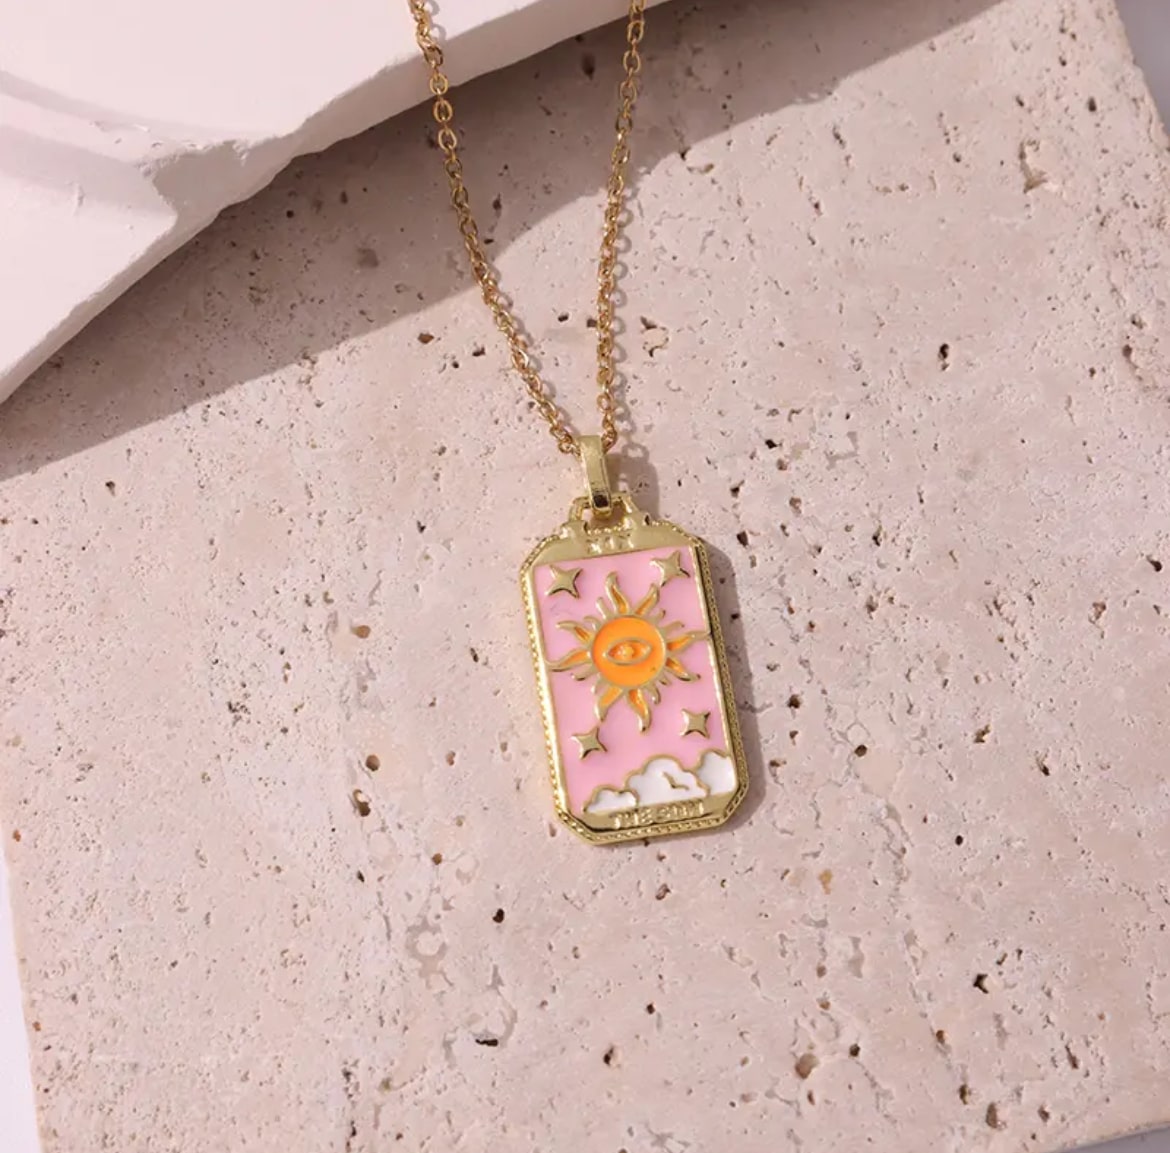 Enchanting pink tarot card jewelry, adding a mystical vibe to your look.